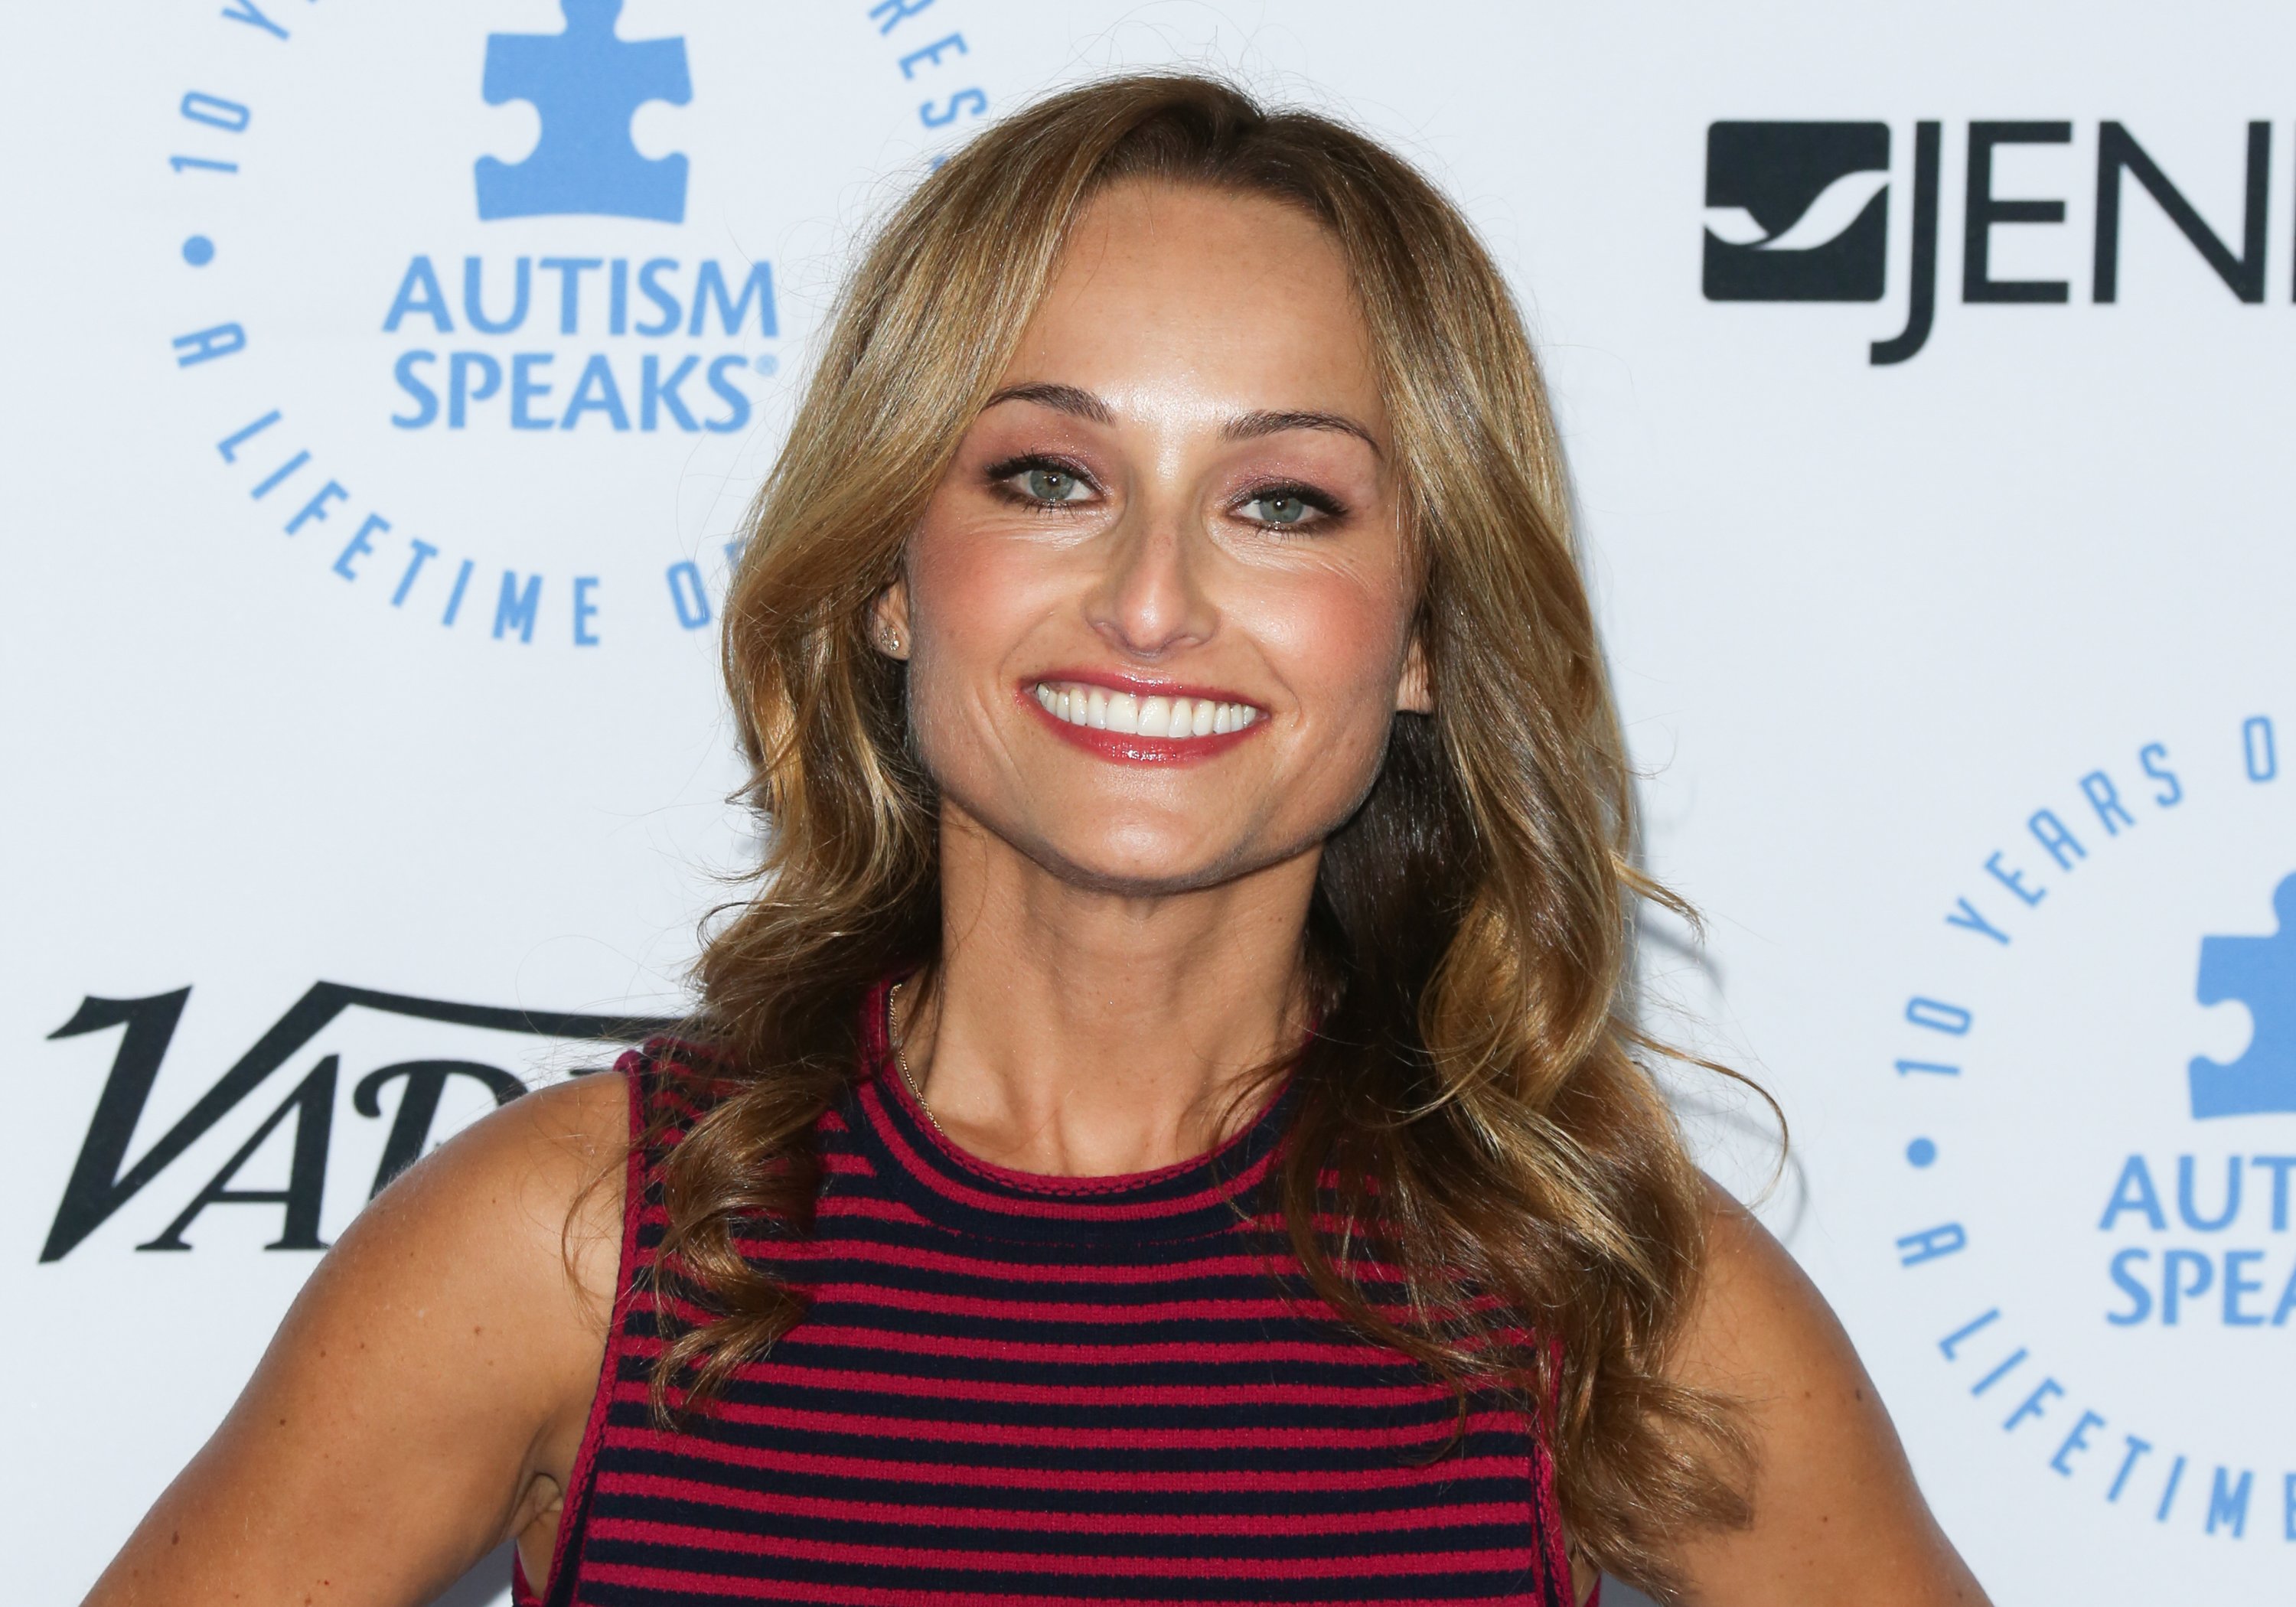 Food Network star Giada De Laurentiis wears a black and red striped sleeveless top in this photograph.